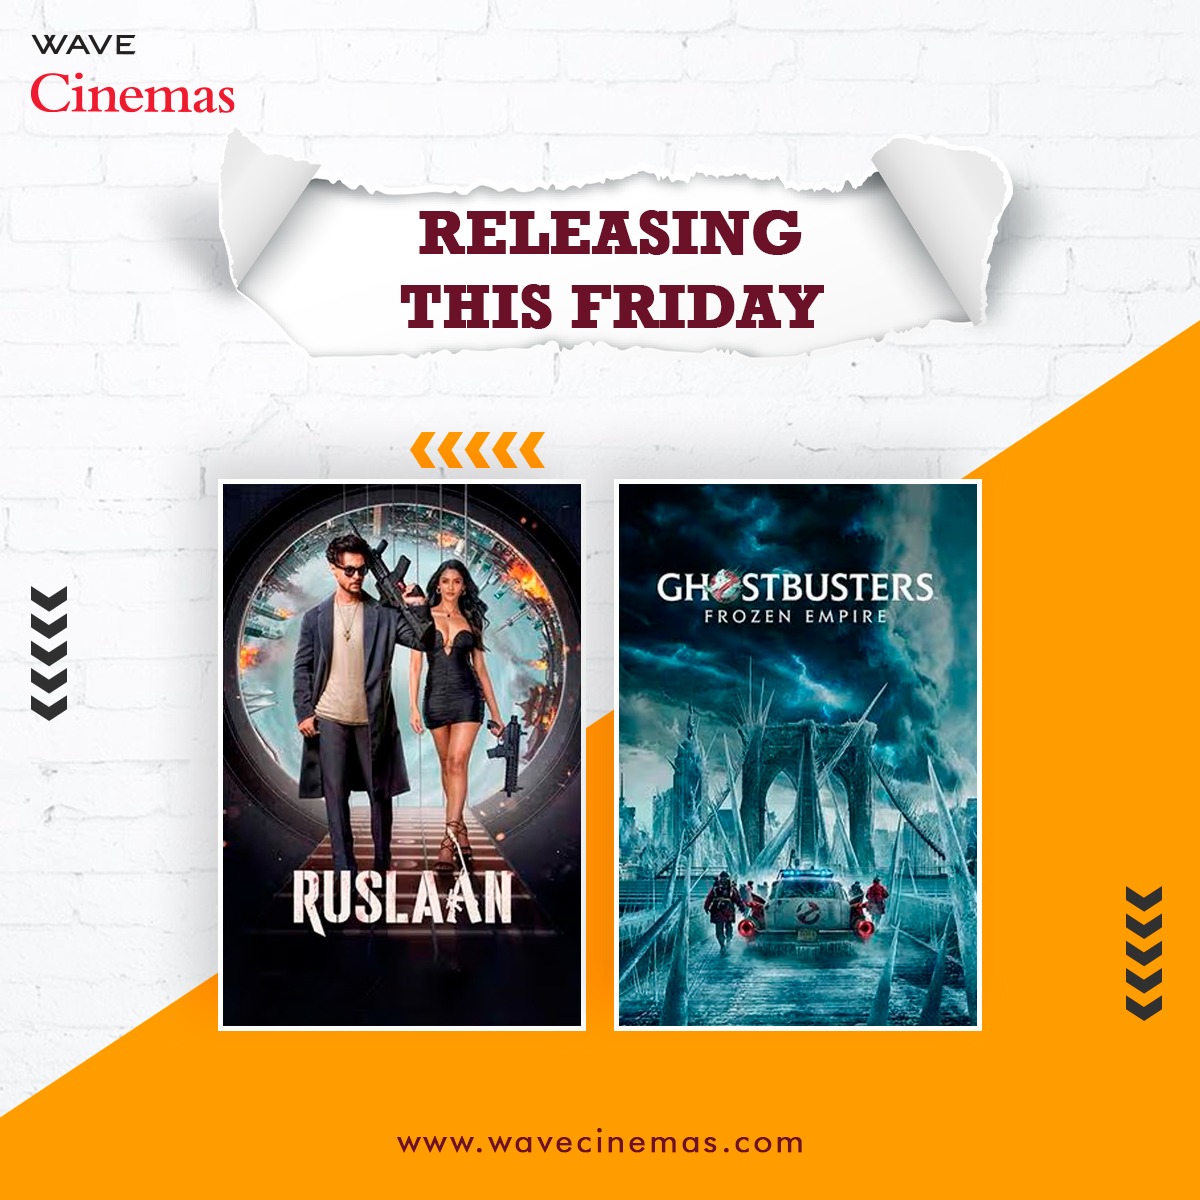 Two Blockbuster Movies are releasing this Friday at #wavecinemas.

Watch the amazing combination our action hero will play with guns and guitar in #Ruslaan or watch Ghostbusters protect the world from a second ice age in #GhostbustersFrozenEmpire .